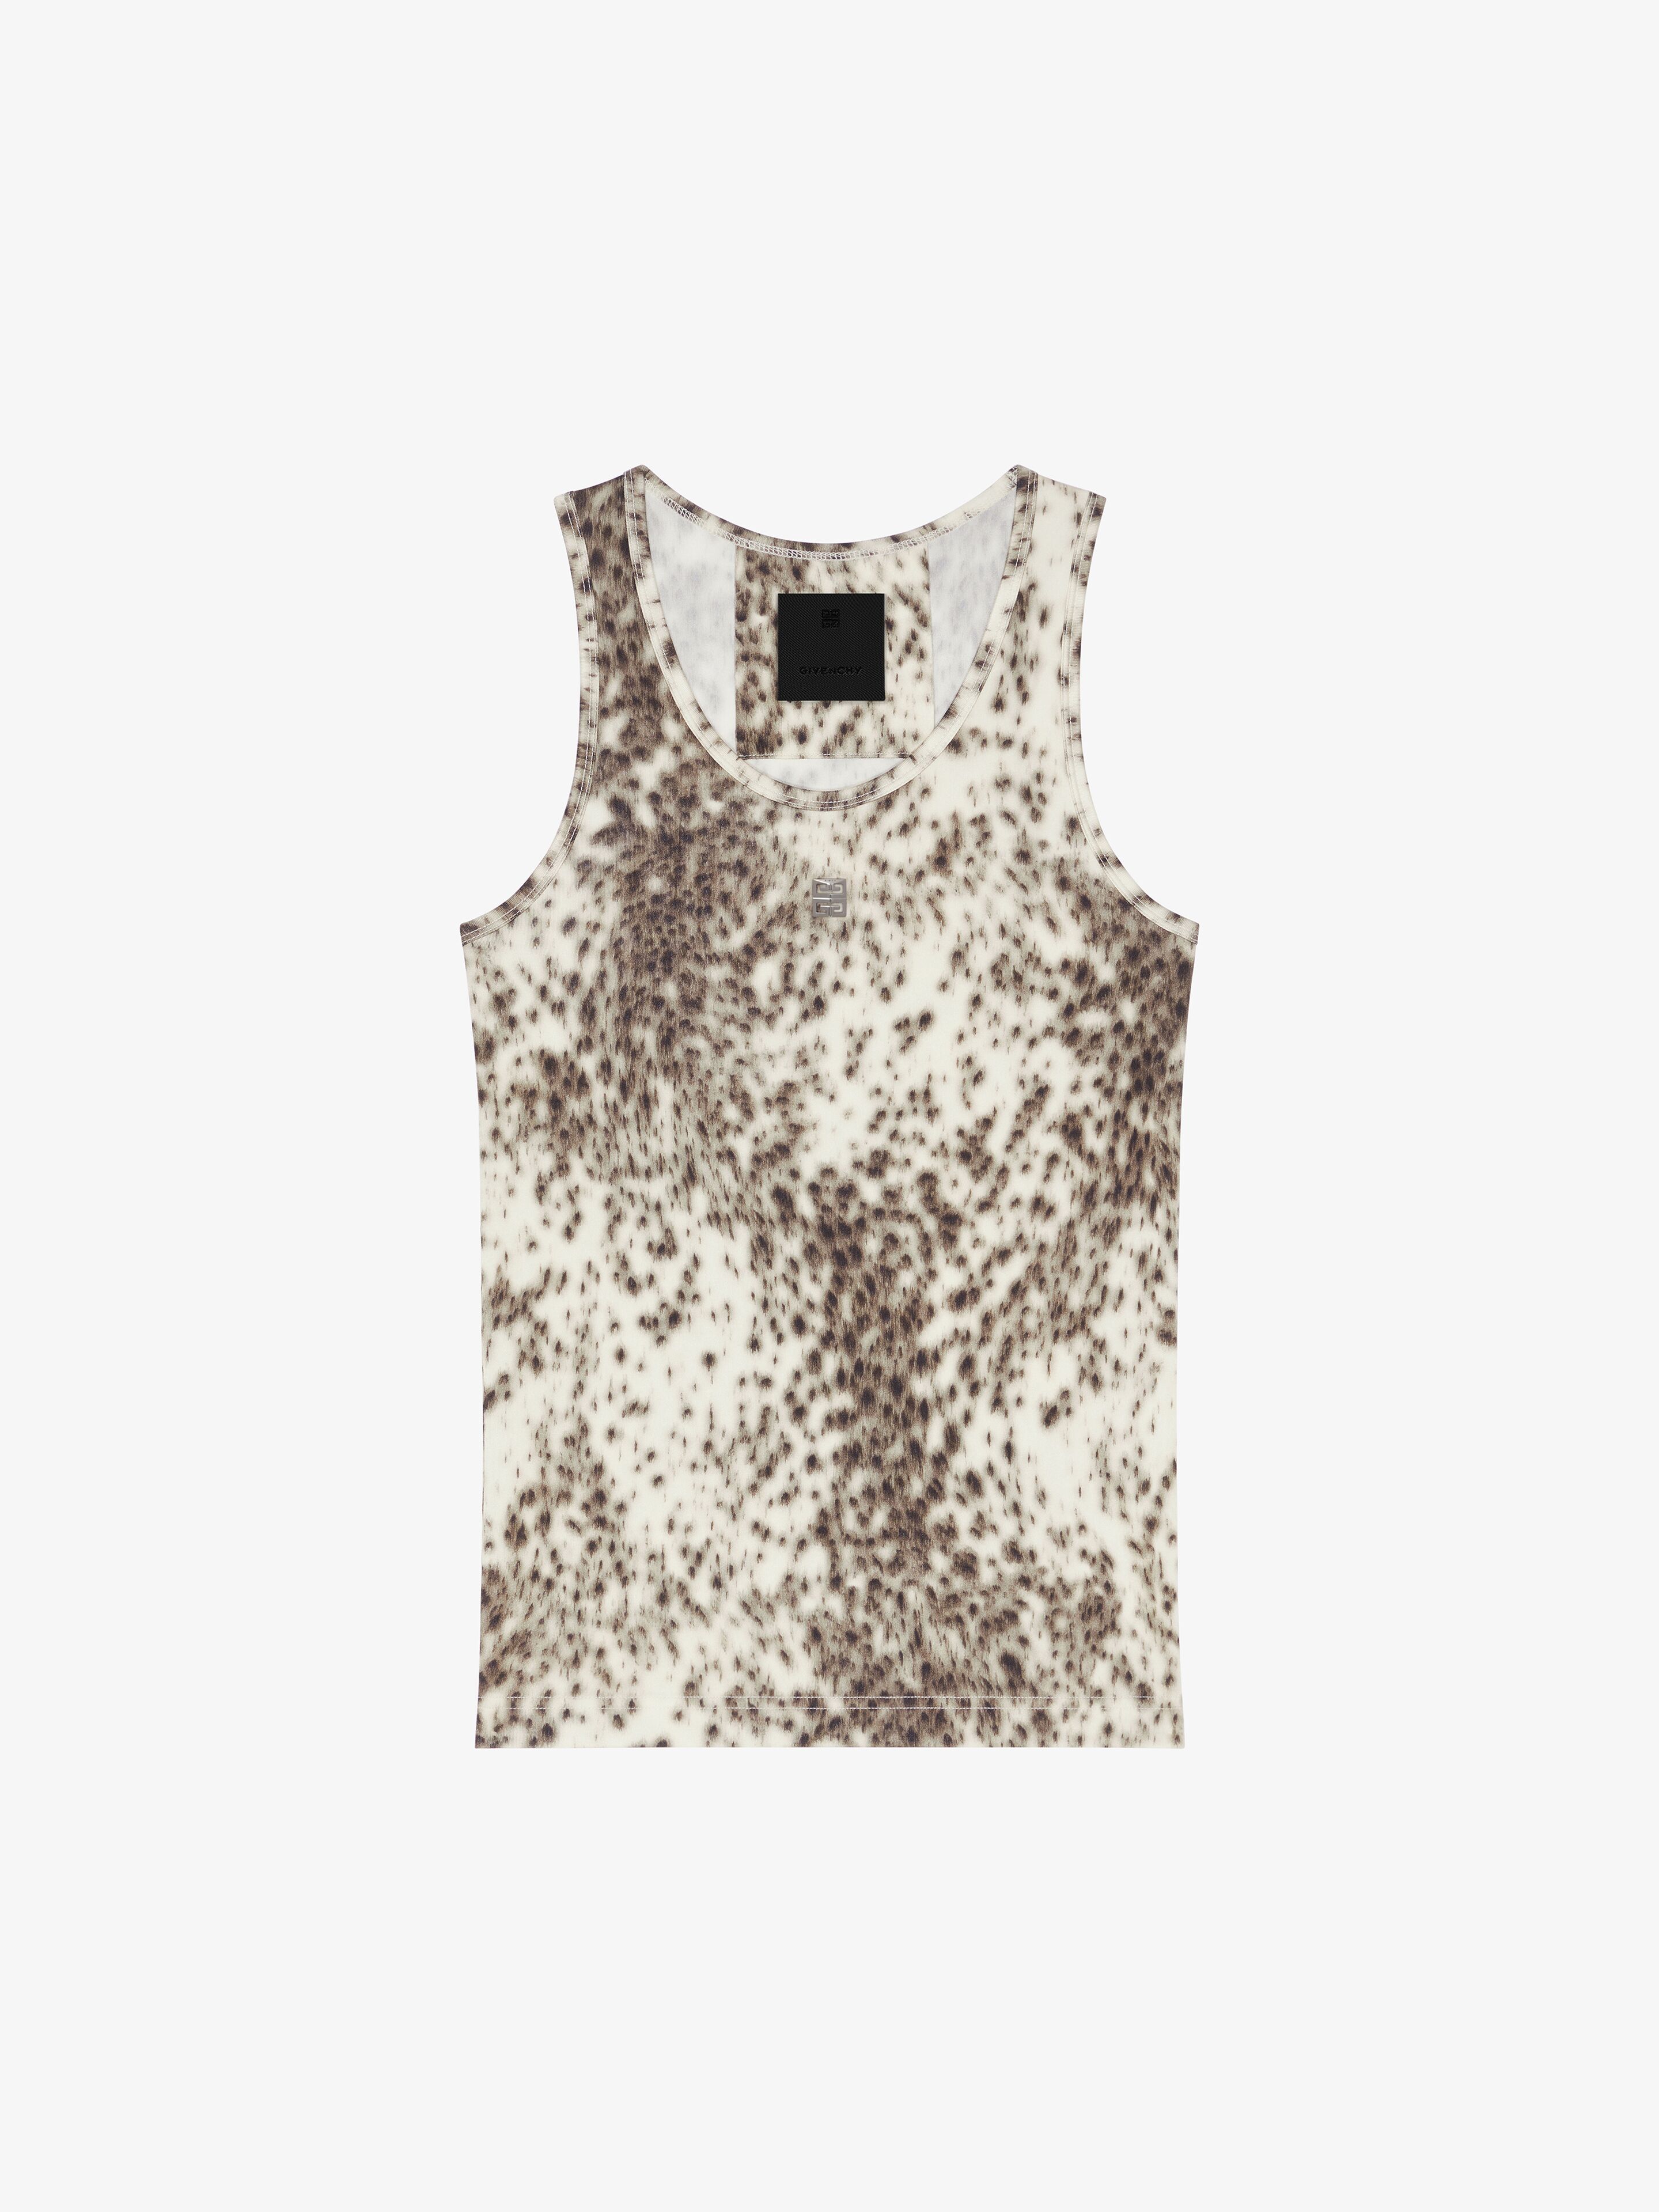 Givenchy Women's Slim Fit Tank Top In Jersey With Snow Leopard Print In Natural/brown